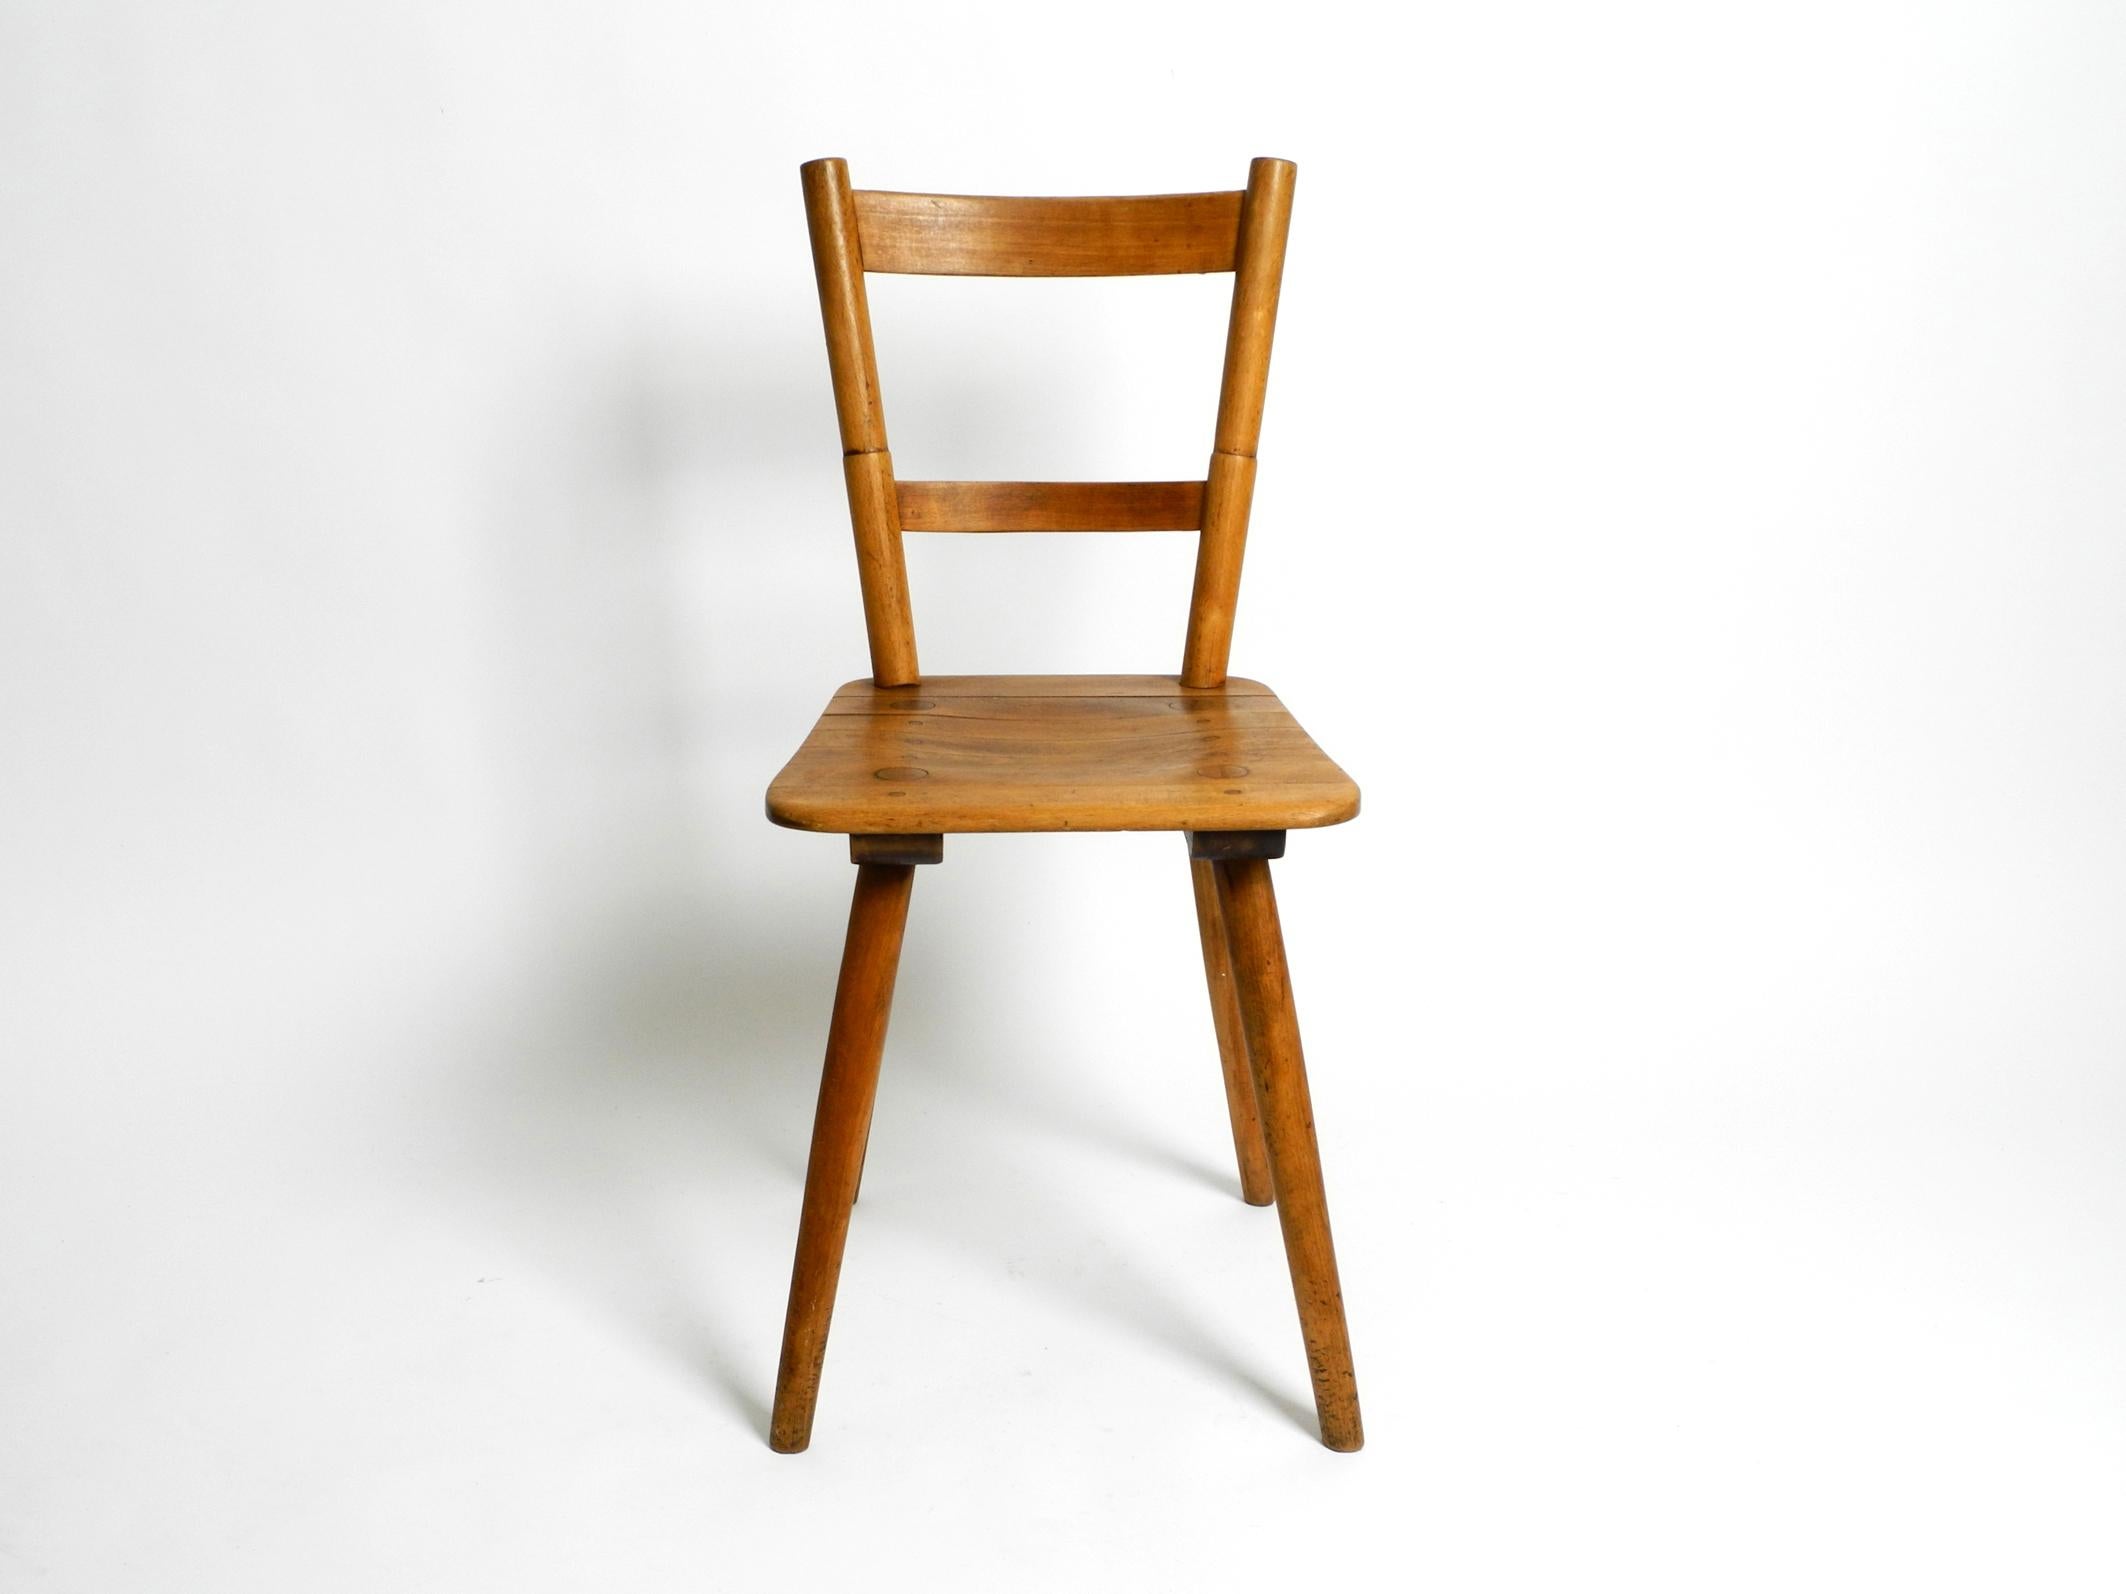 Original Tübingen chair from the 1930s by Prof. Adolf Gustav Schneck for Schäfer. Made in Germany.
Seat made of red beech slats. All parts glued and inserted. No metal screws.
The Tübingen chair was produced for decades by the Schäfer chair and